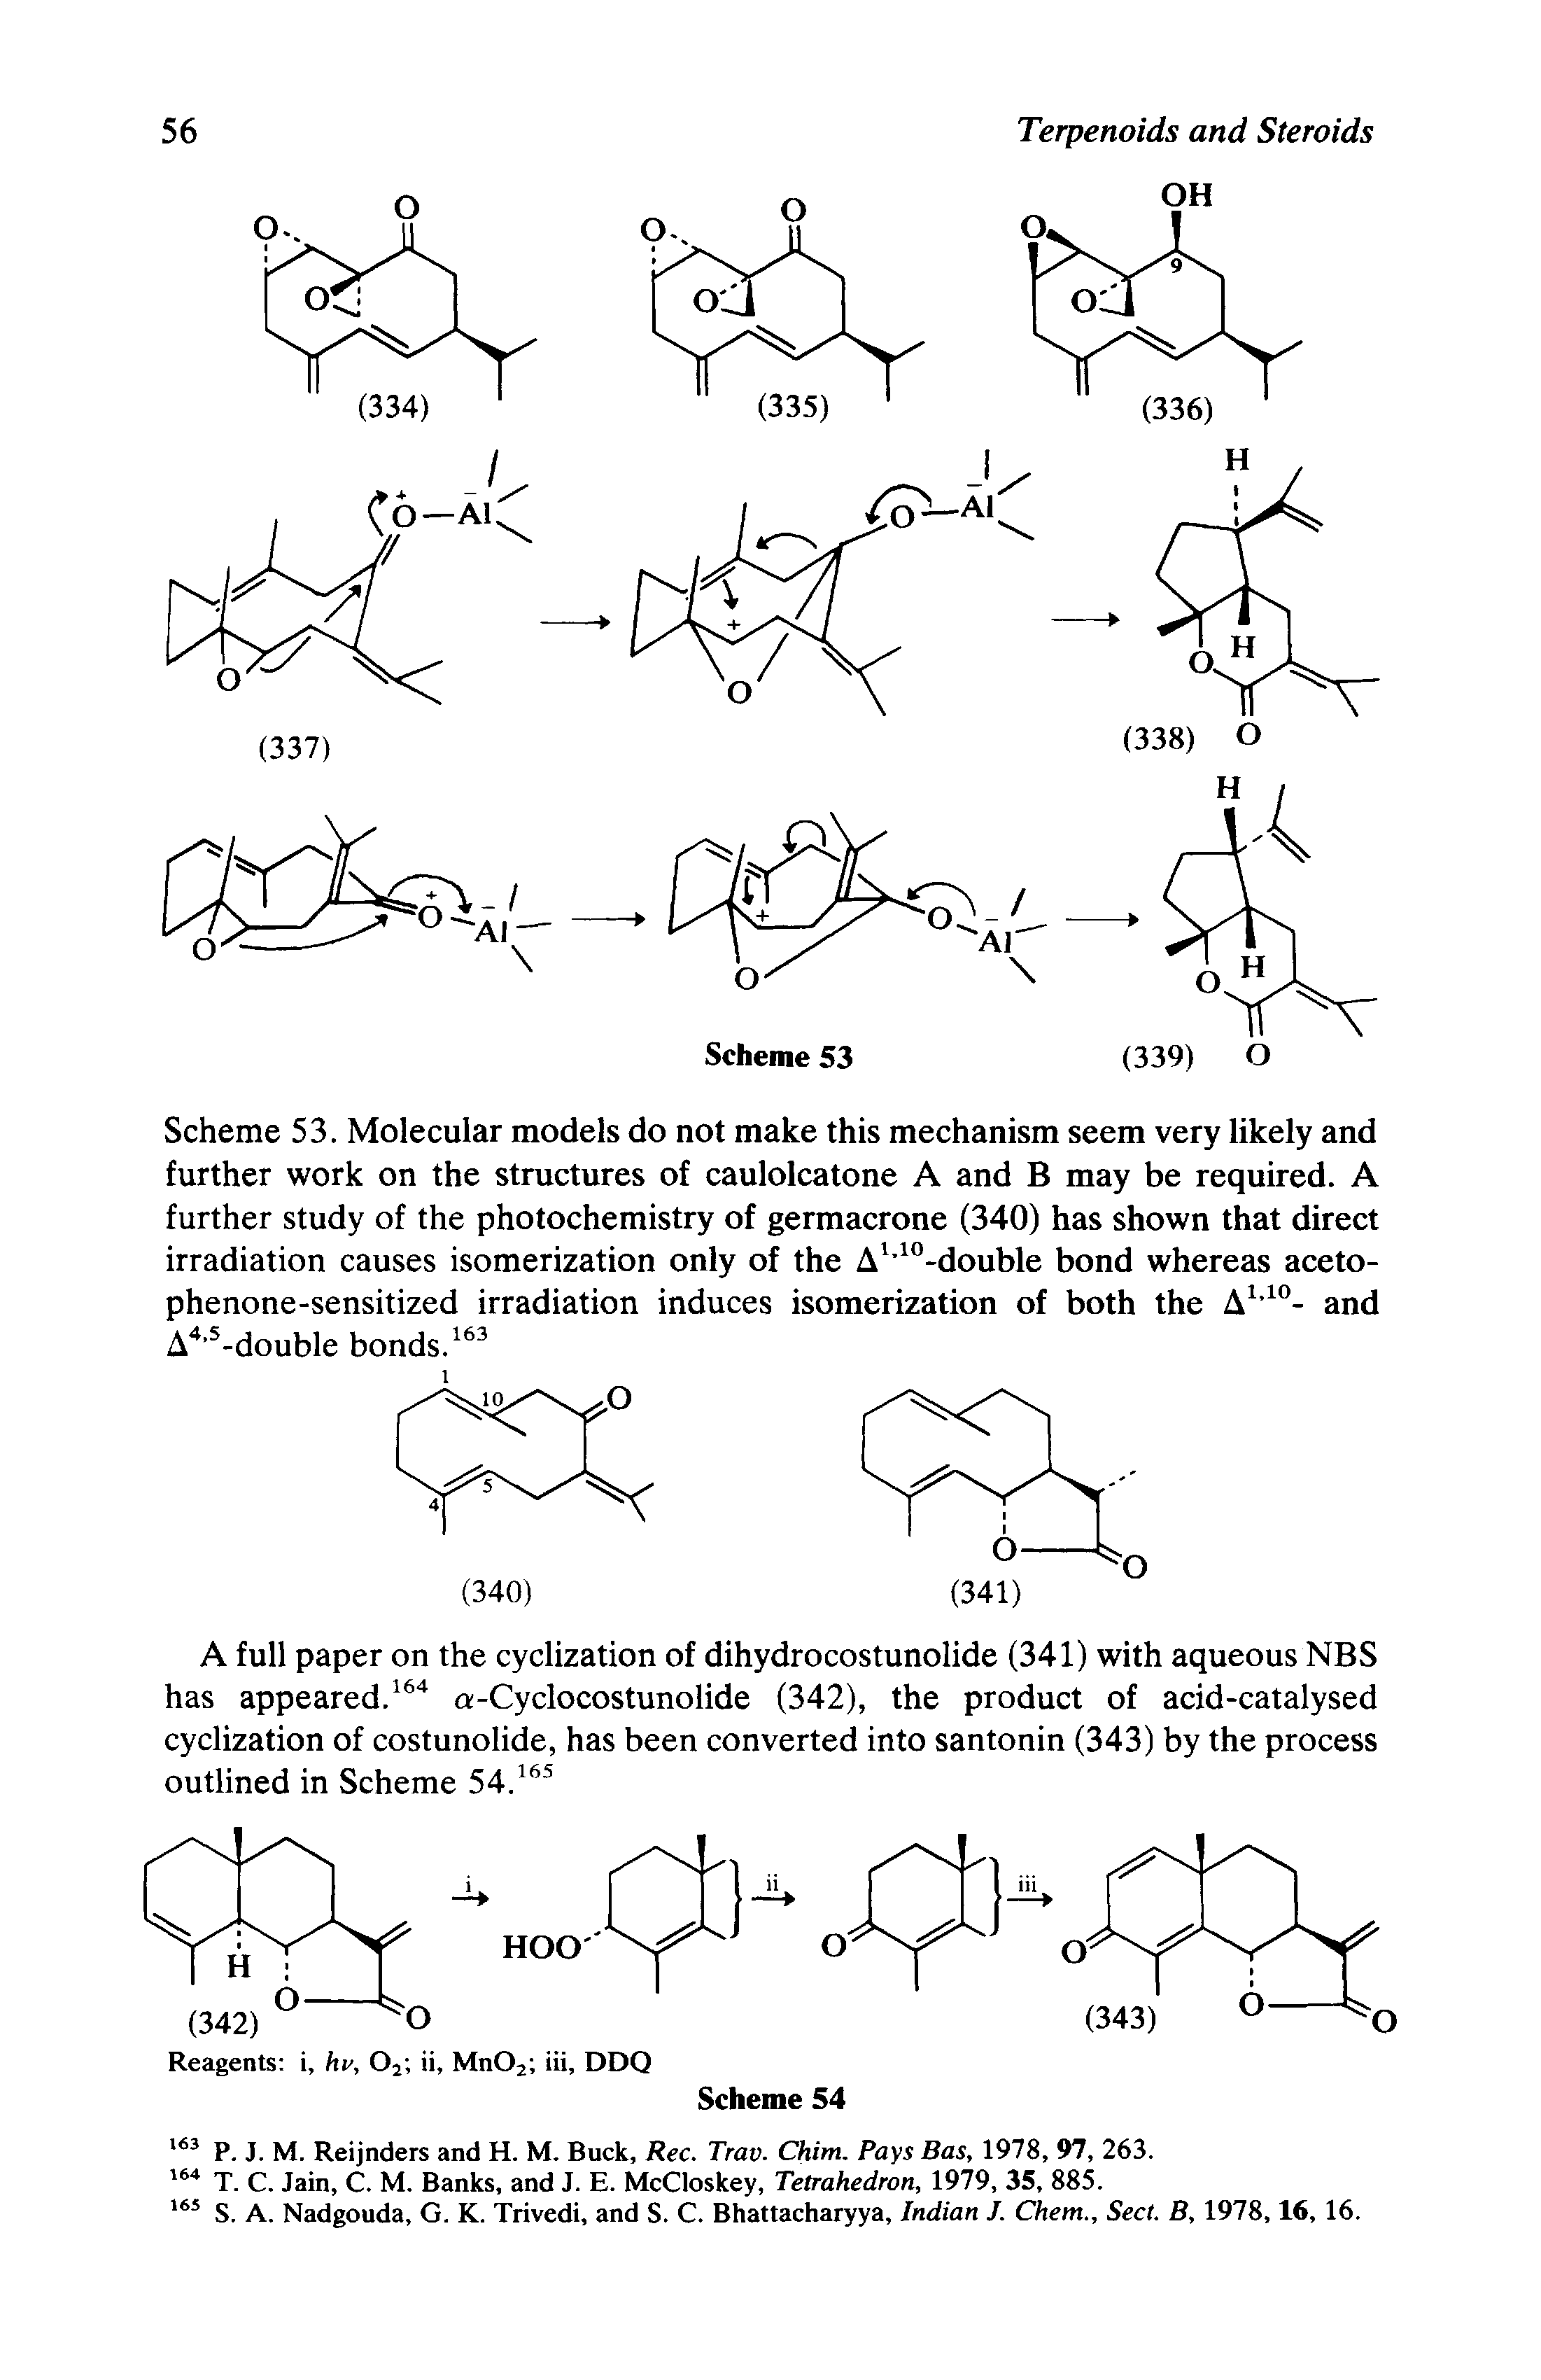 Scheme 53. Molecular models do not make this mechanism seem very likely and further work on the structures of caulolcatone A and B may be required. A further study of the photochemistry of germacrone (340) has shown that direct irradiation causes isomerization only of the A °-double bond whereas acetophenone-sensitized irradiation induces isomerization of both the and...